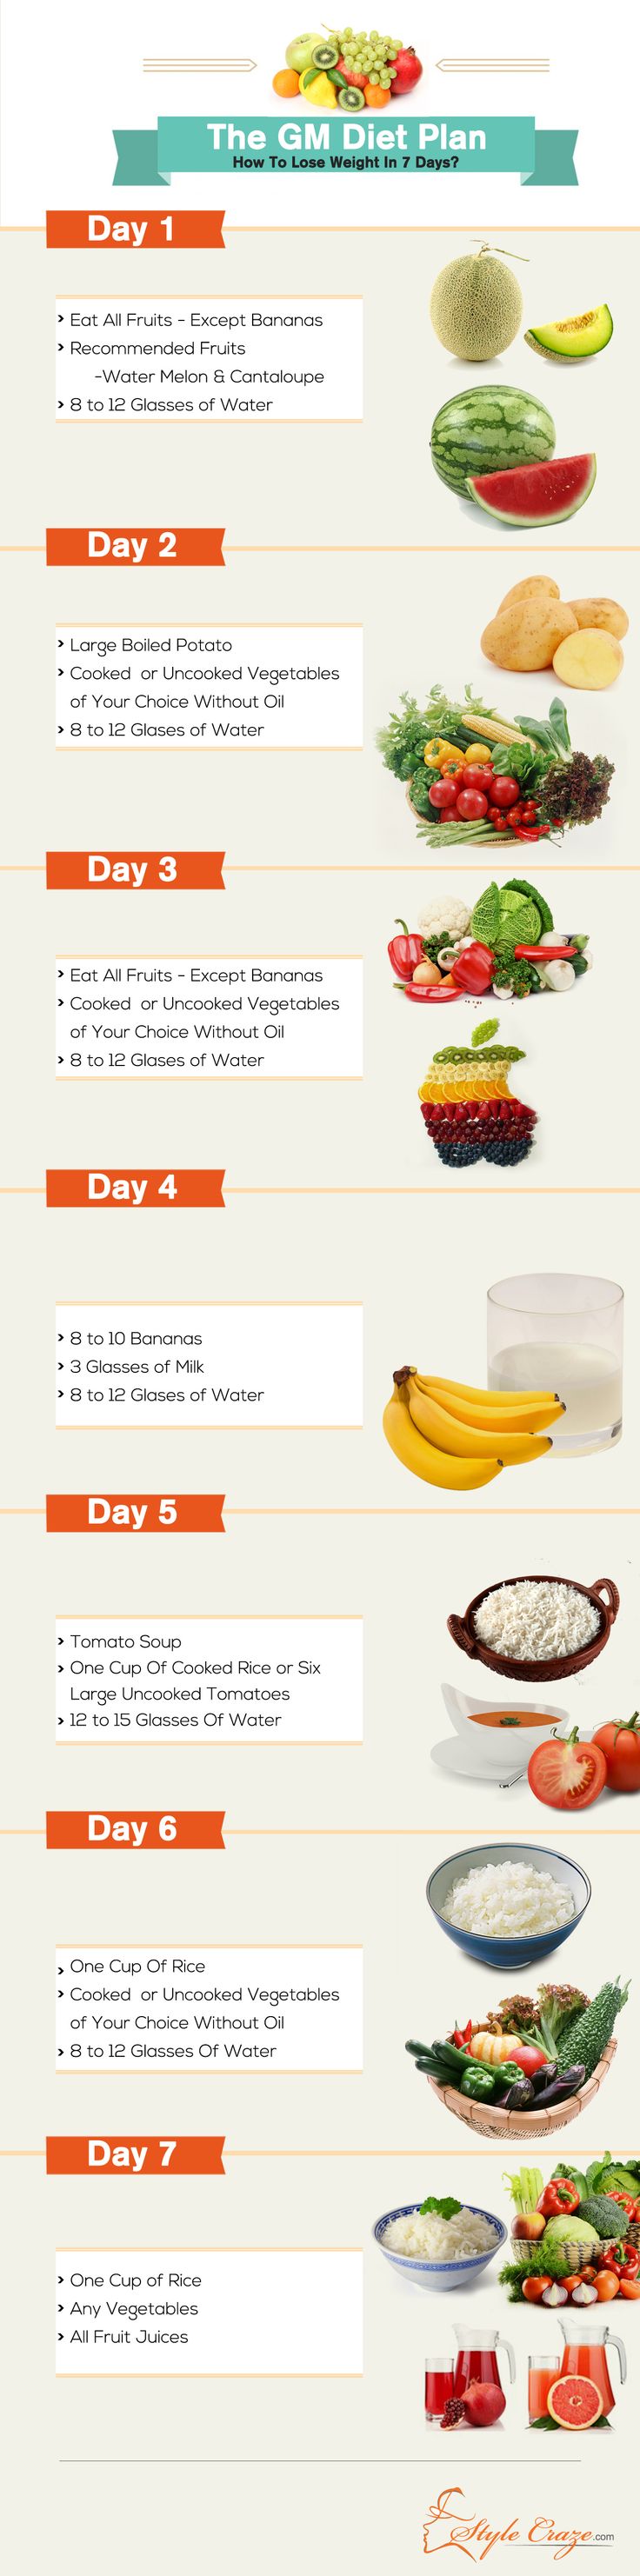 easy diets to lose weight